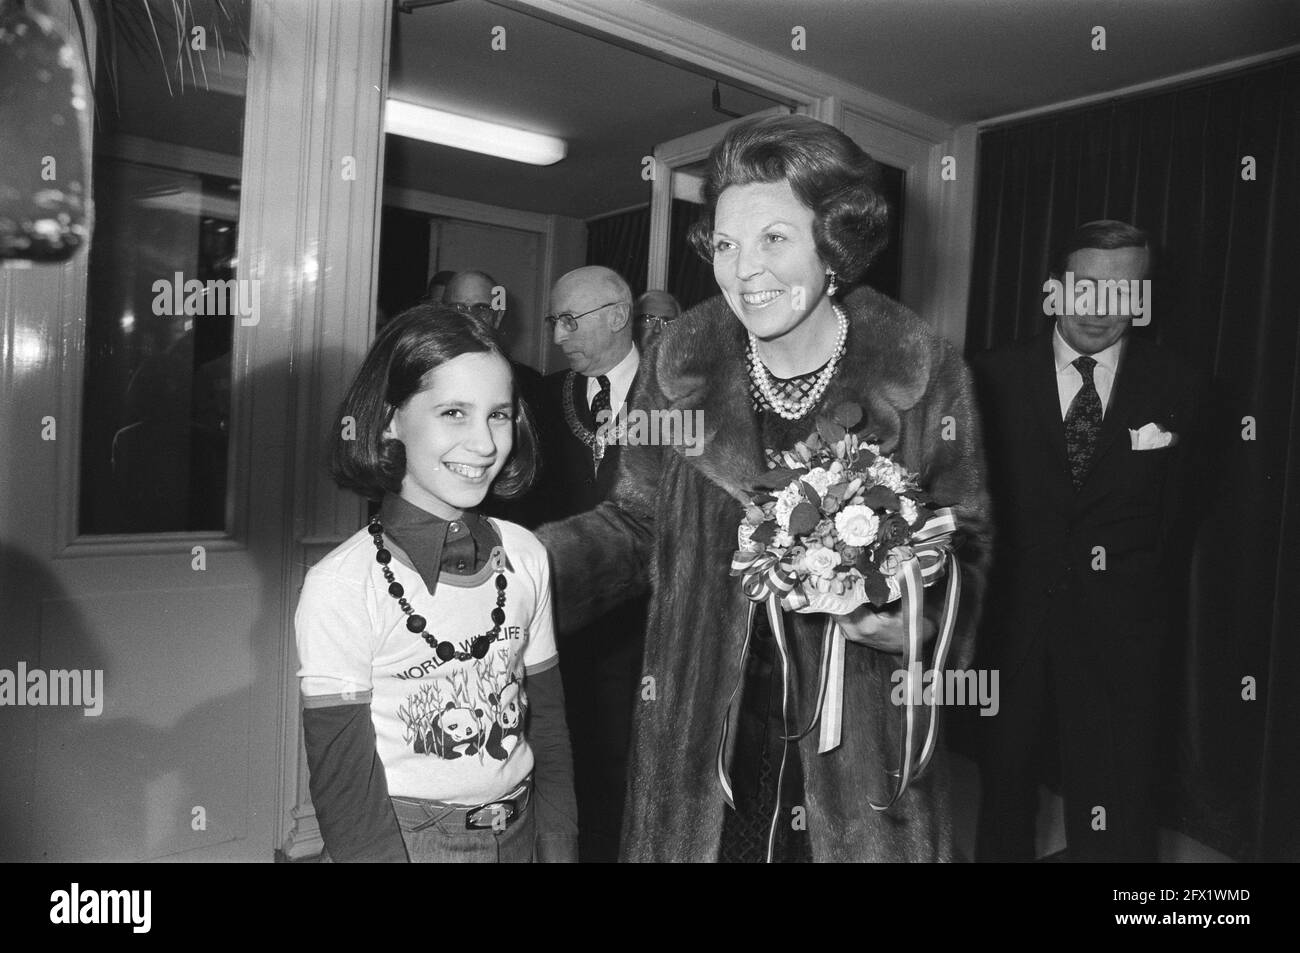 Princess Beatrix receives flowers from the daughter of bassist Raymond Nijenhuis; in the middle Mayor Ivo Samkalden, March 14, 1977, concerts, girls, princesses, The Netherlands, 20th century press agency photo, news to remember, documentary, historic photography 1945-1990, visual stories, human history of the Twentieth Century, capturing moments in time Stock Photo